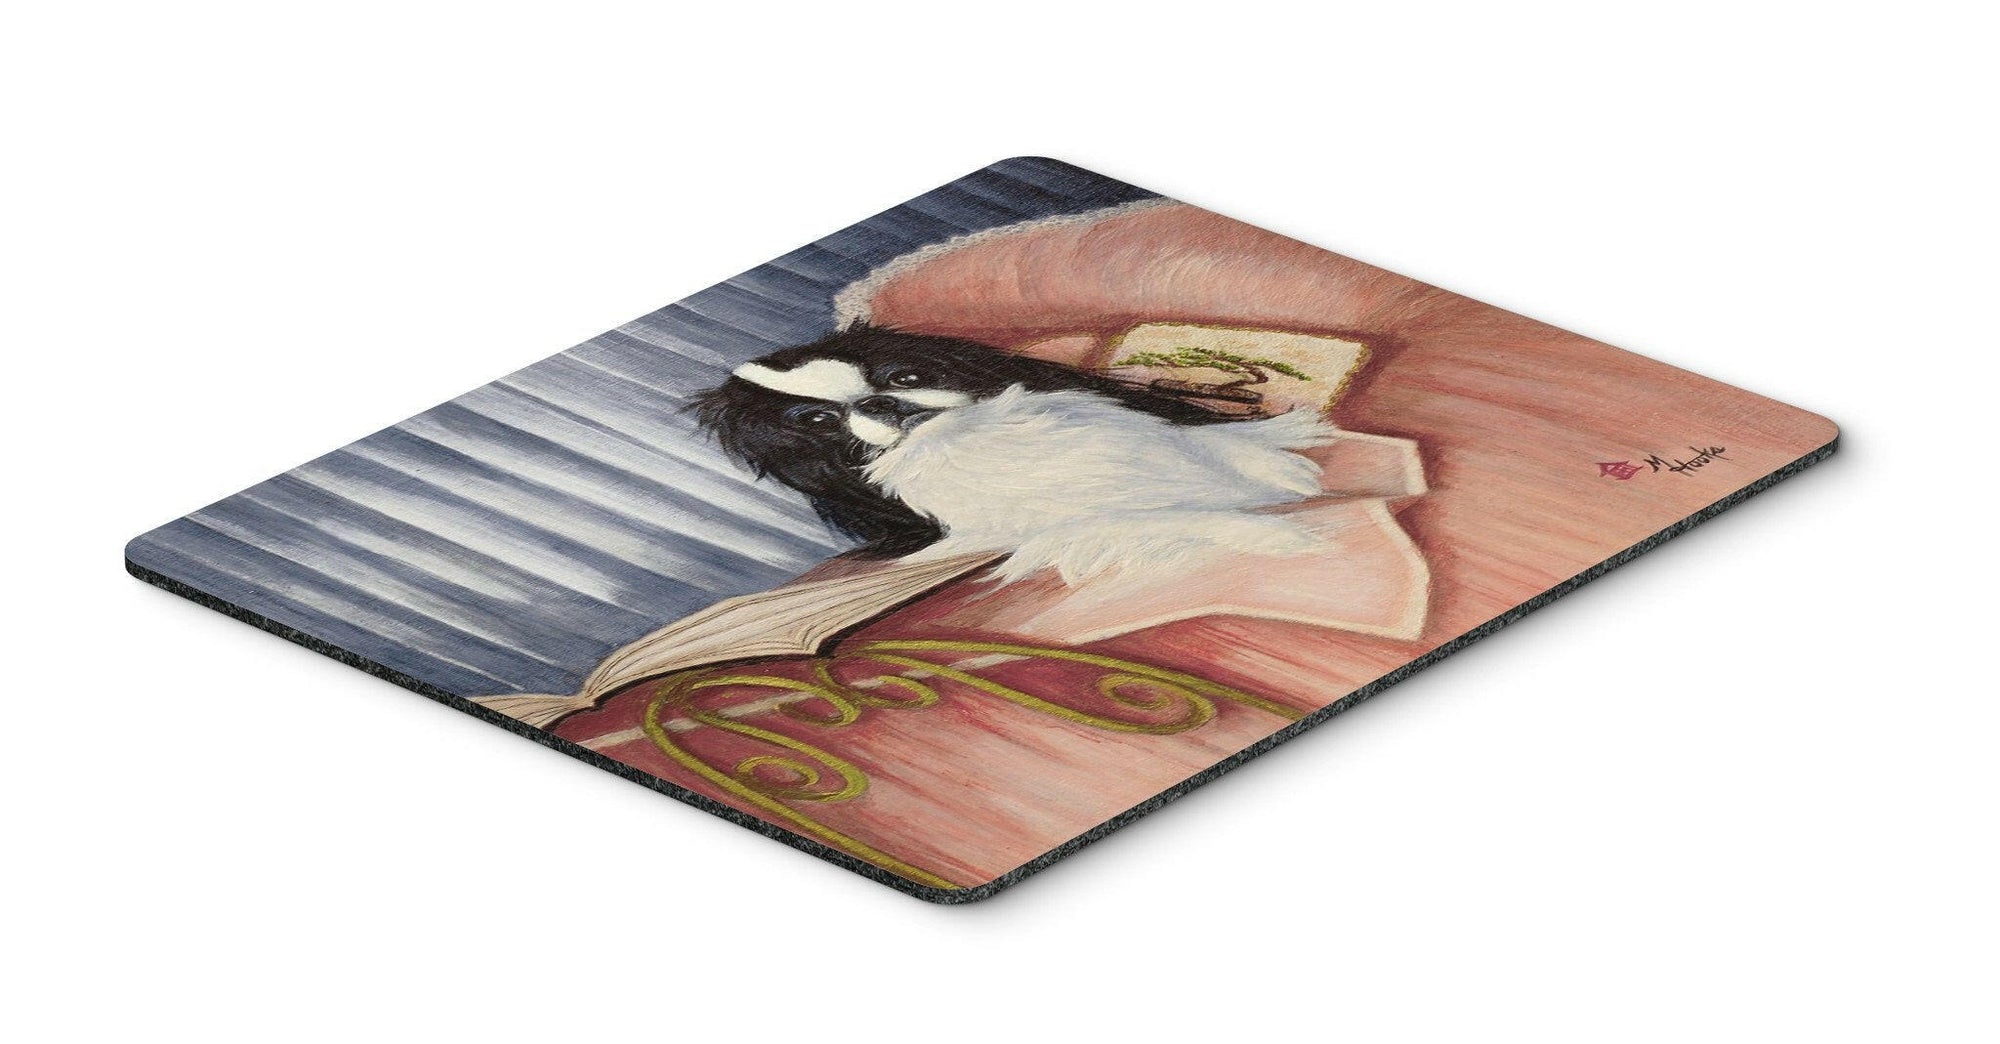 Japanese Chin Reading in Bed Mouse Pad, Hot Pad or Trivet MH1058MP by Caroline's Treasures